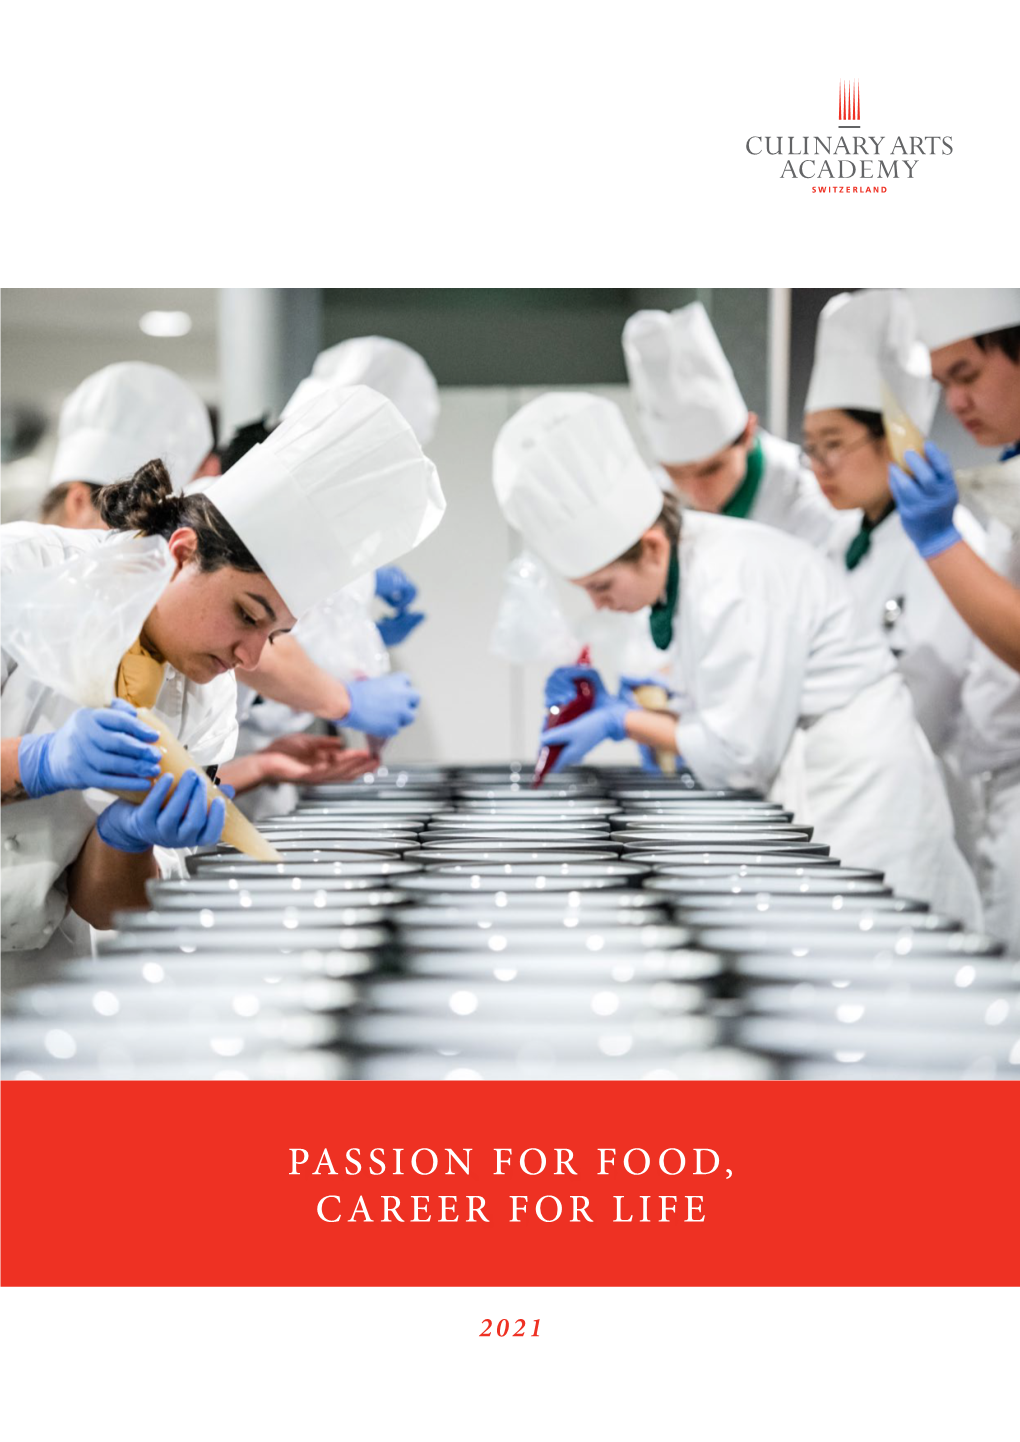 Passion for Food, Career for Life